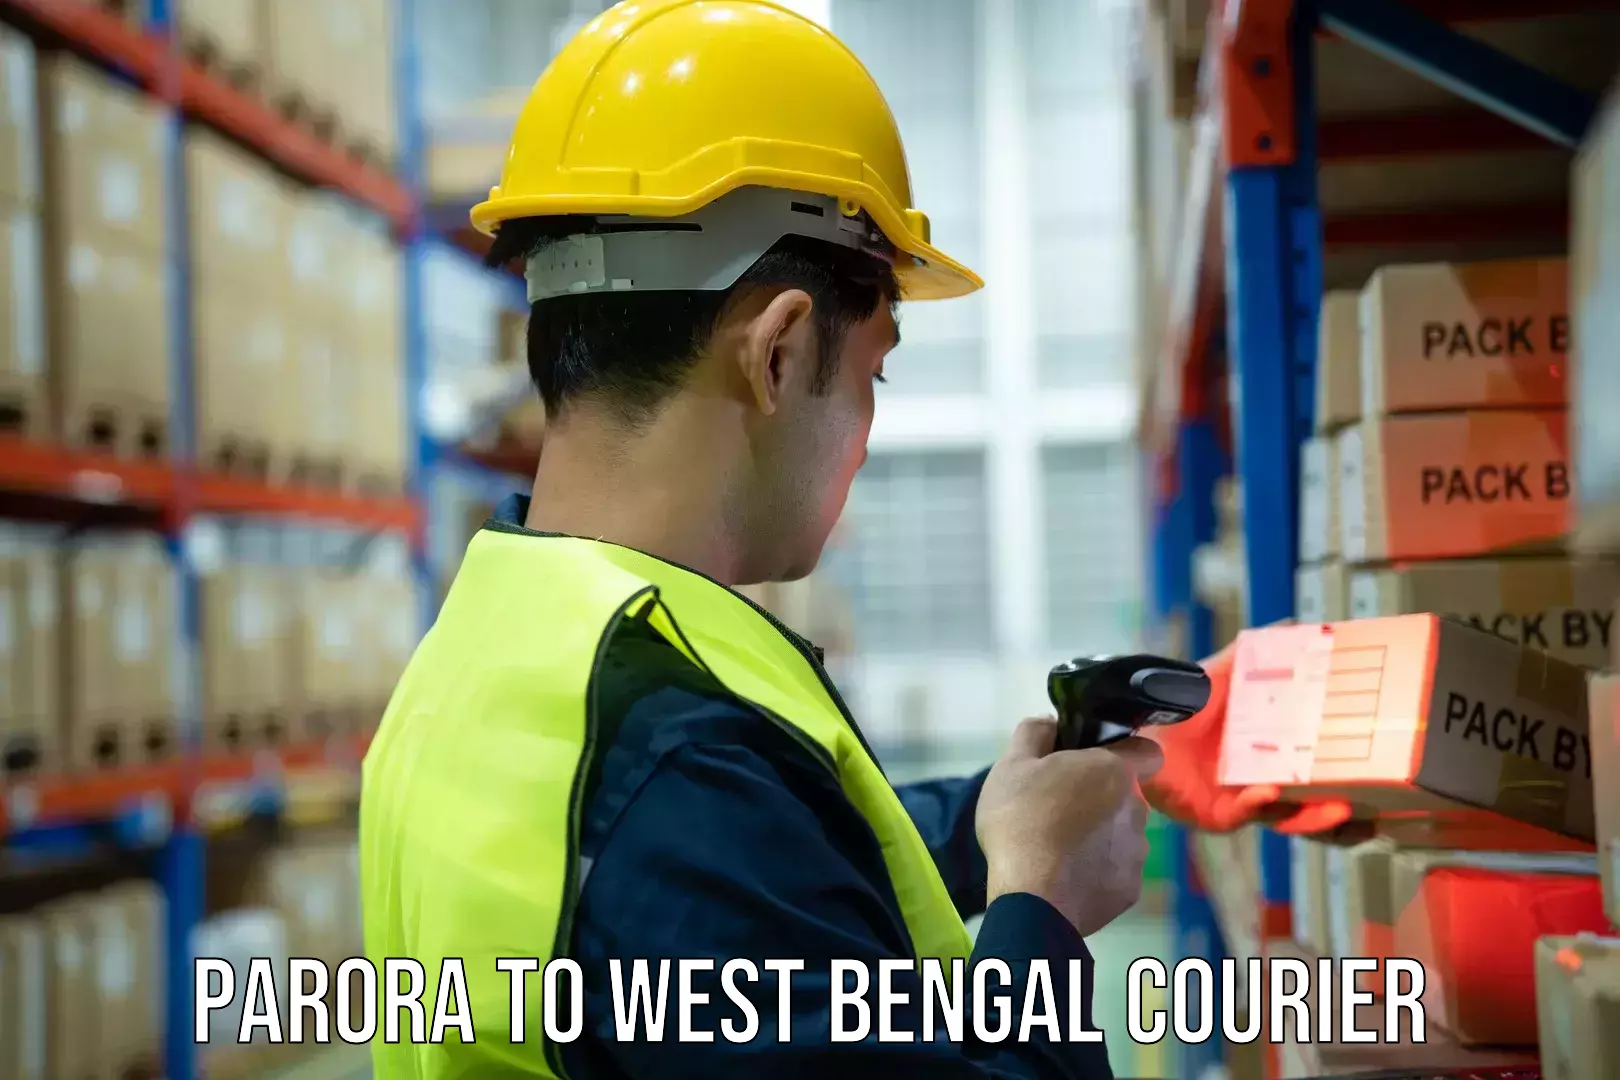 Express delivery capabilities Parora to West Bengal